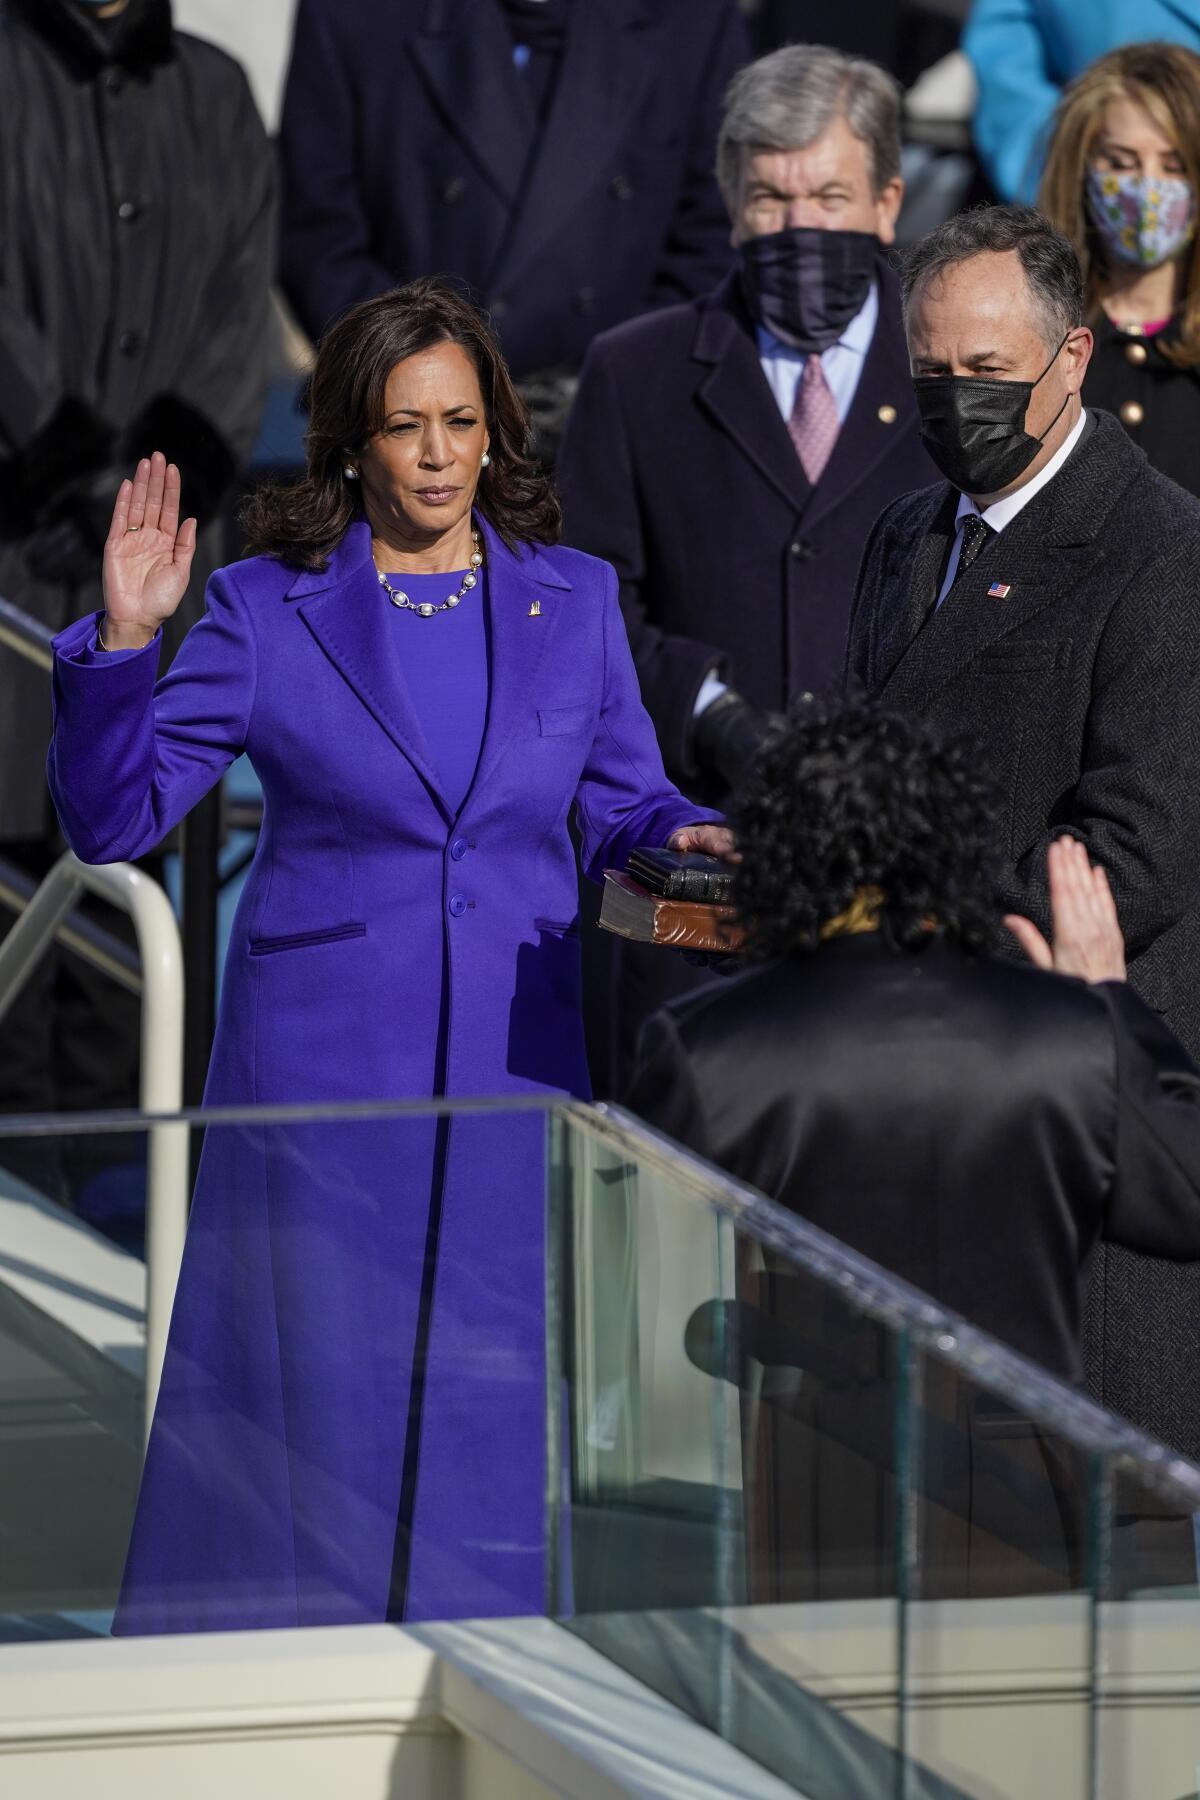 U.S. Vice President-elect Kamala Harris takes the oath of office from Supreme Court Justice Sonia Sotomayor on Wednesday.